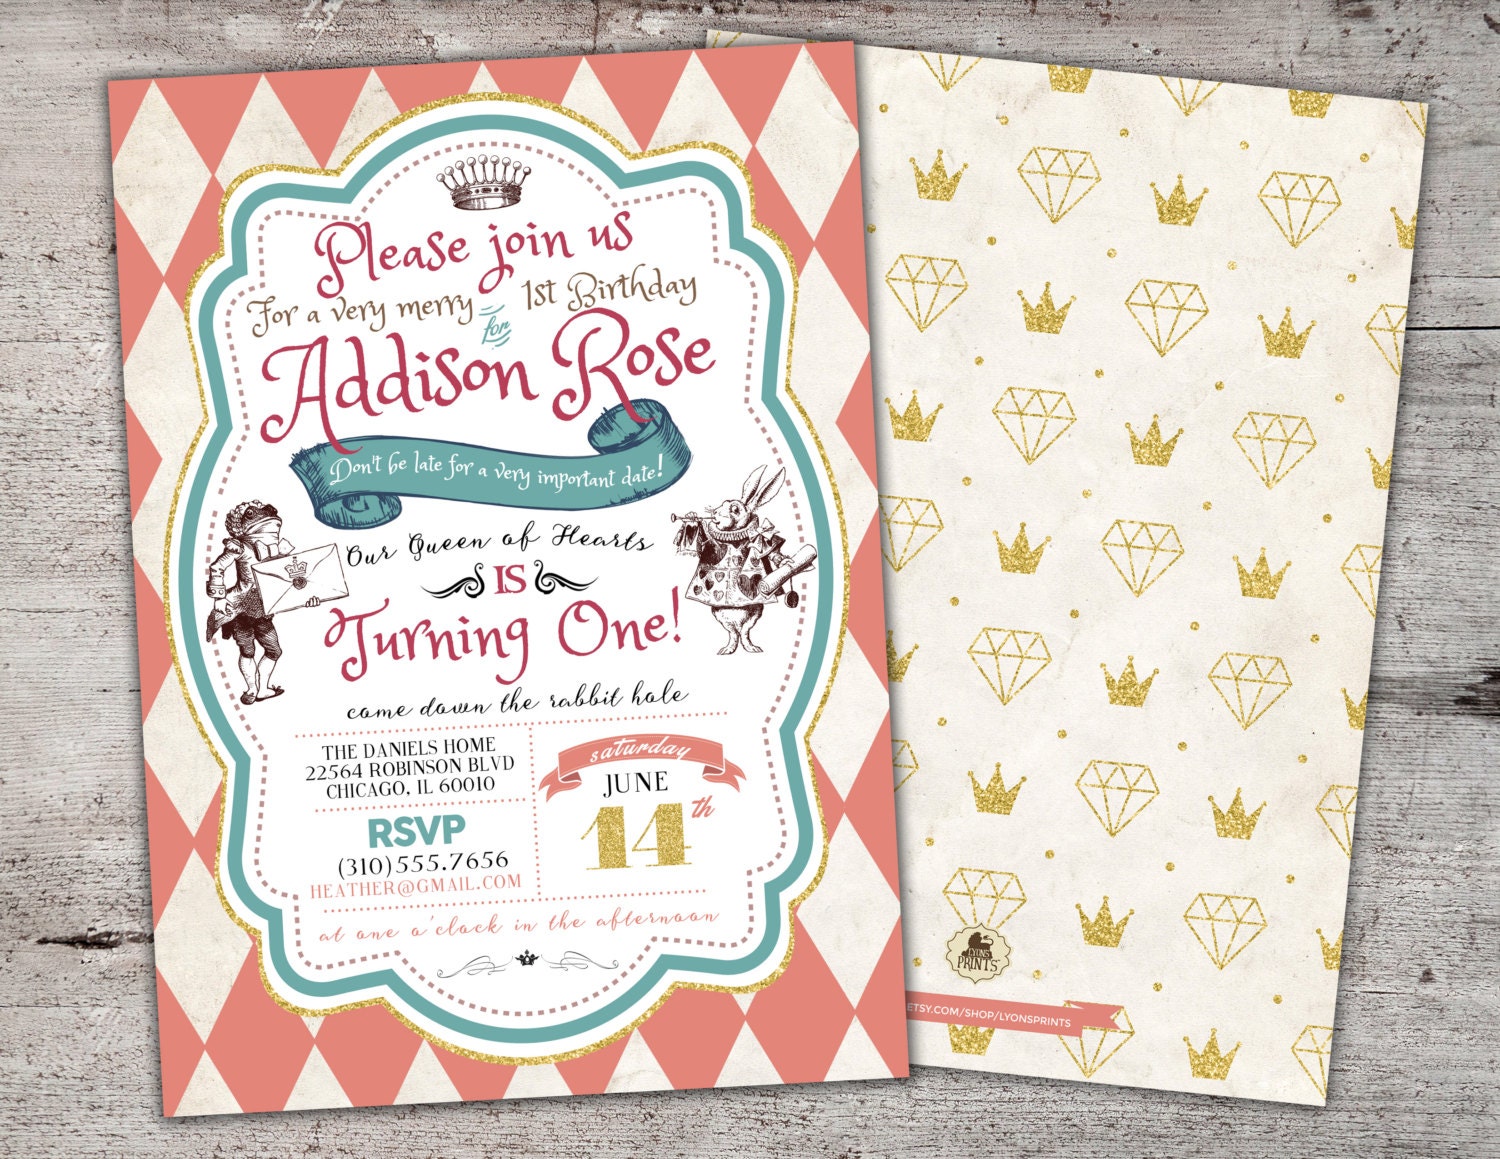 Alice in Wonderland Invitation/First Birthday Mad Hatter Tea Party - Printable For Or Wedding Baby Shower